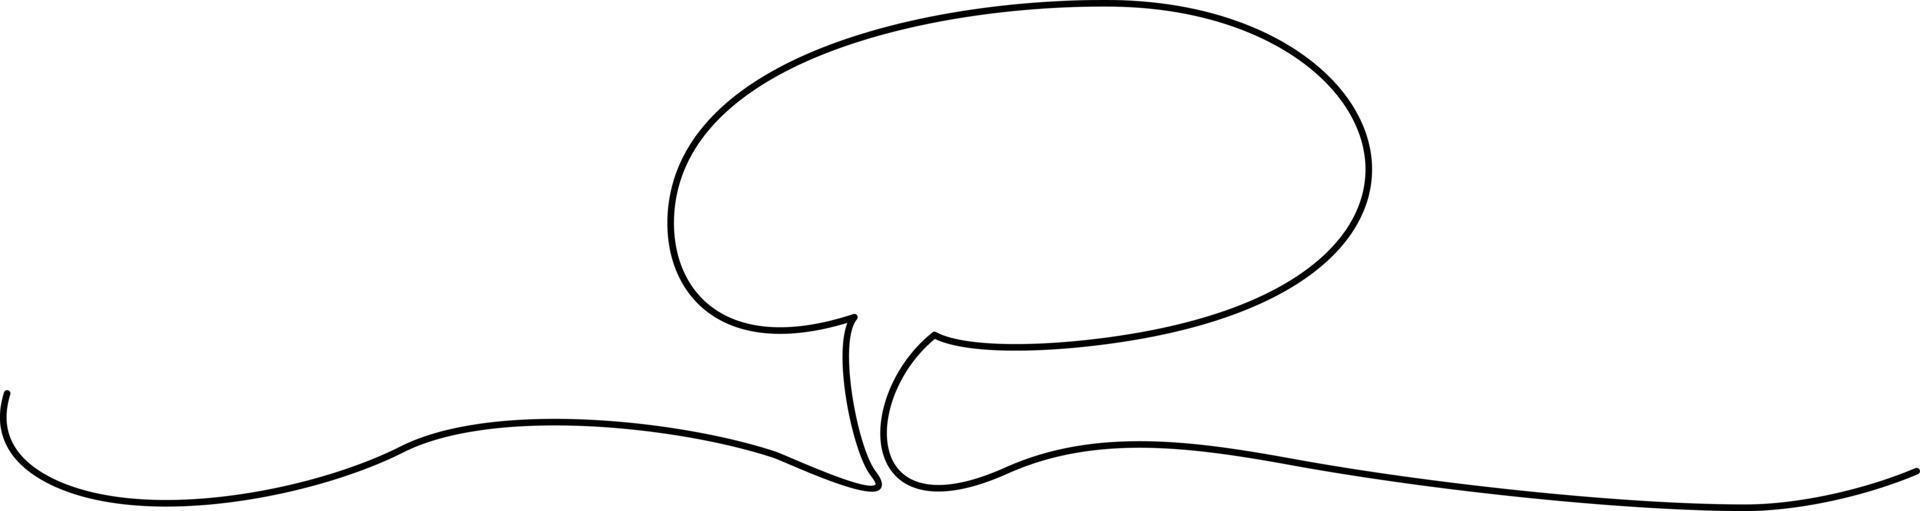 Continuous one line drawing of speech bubble vector